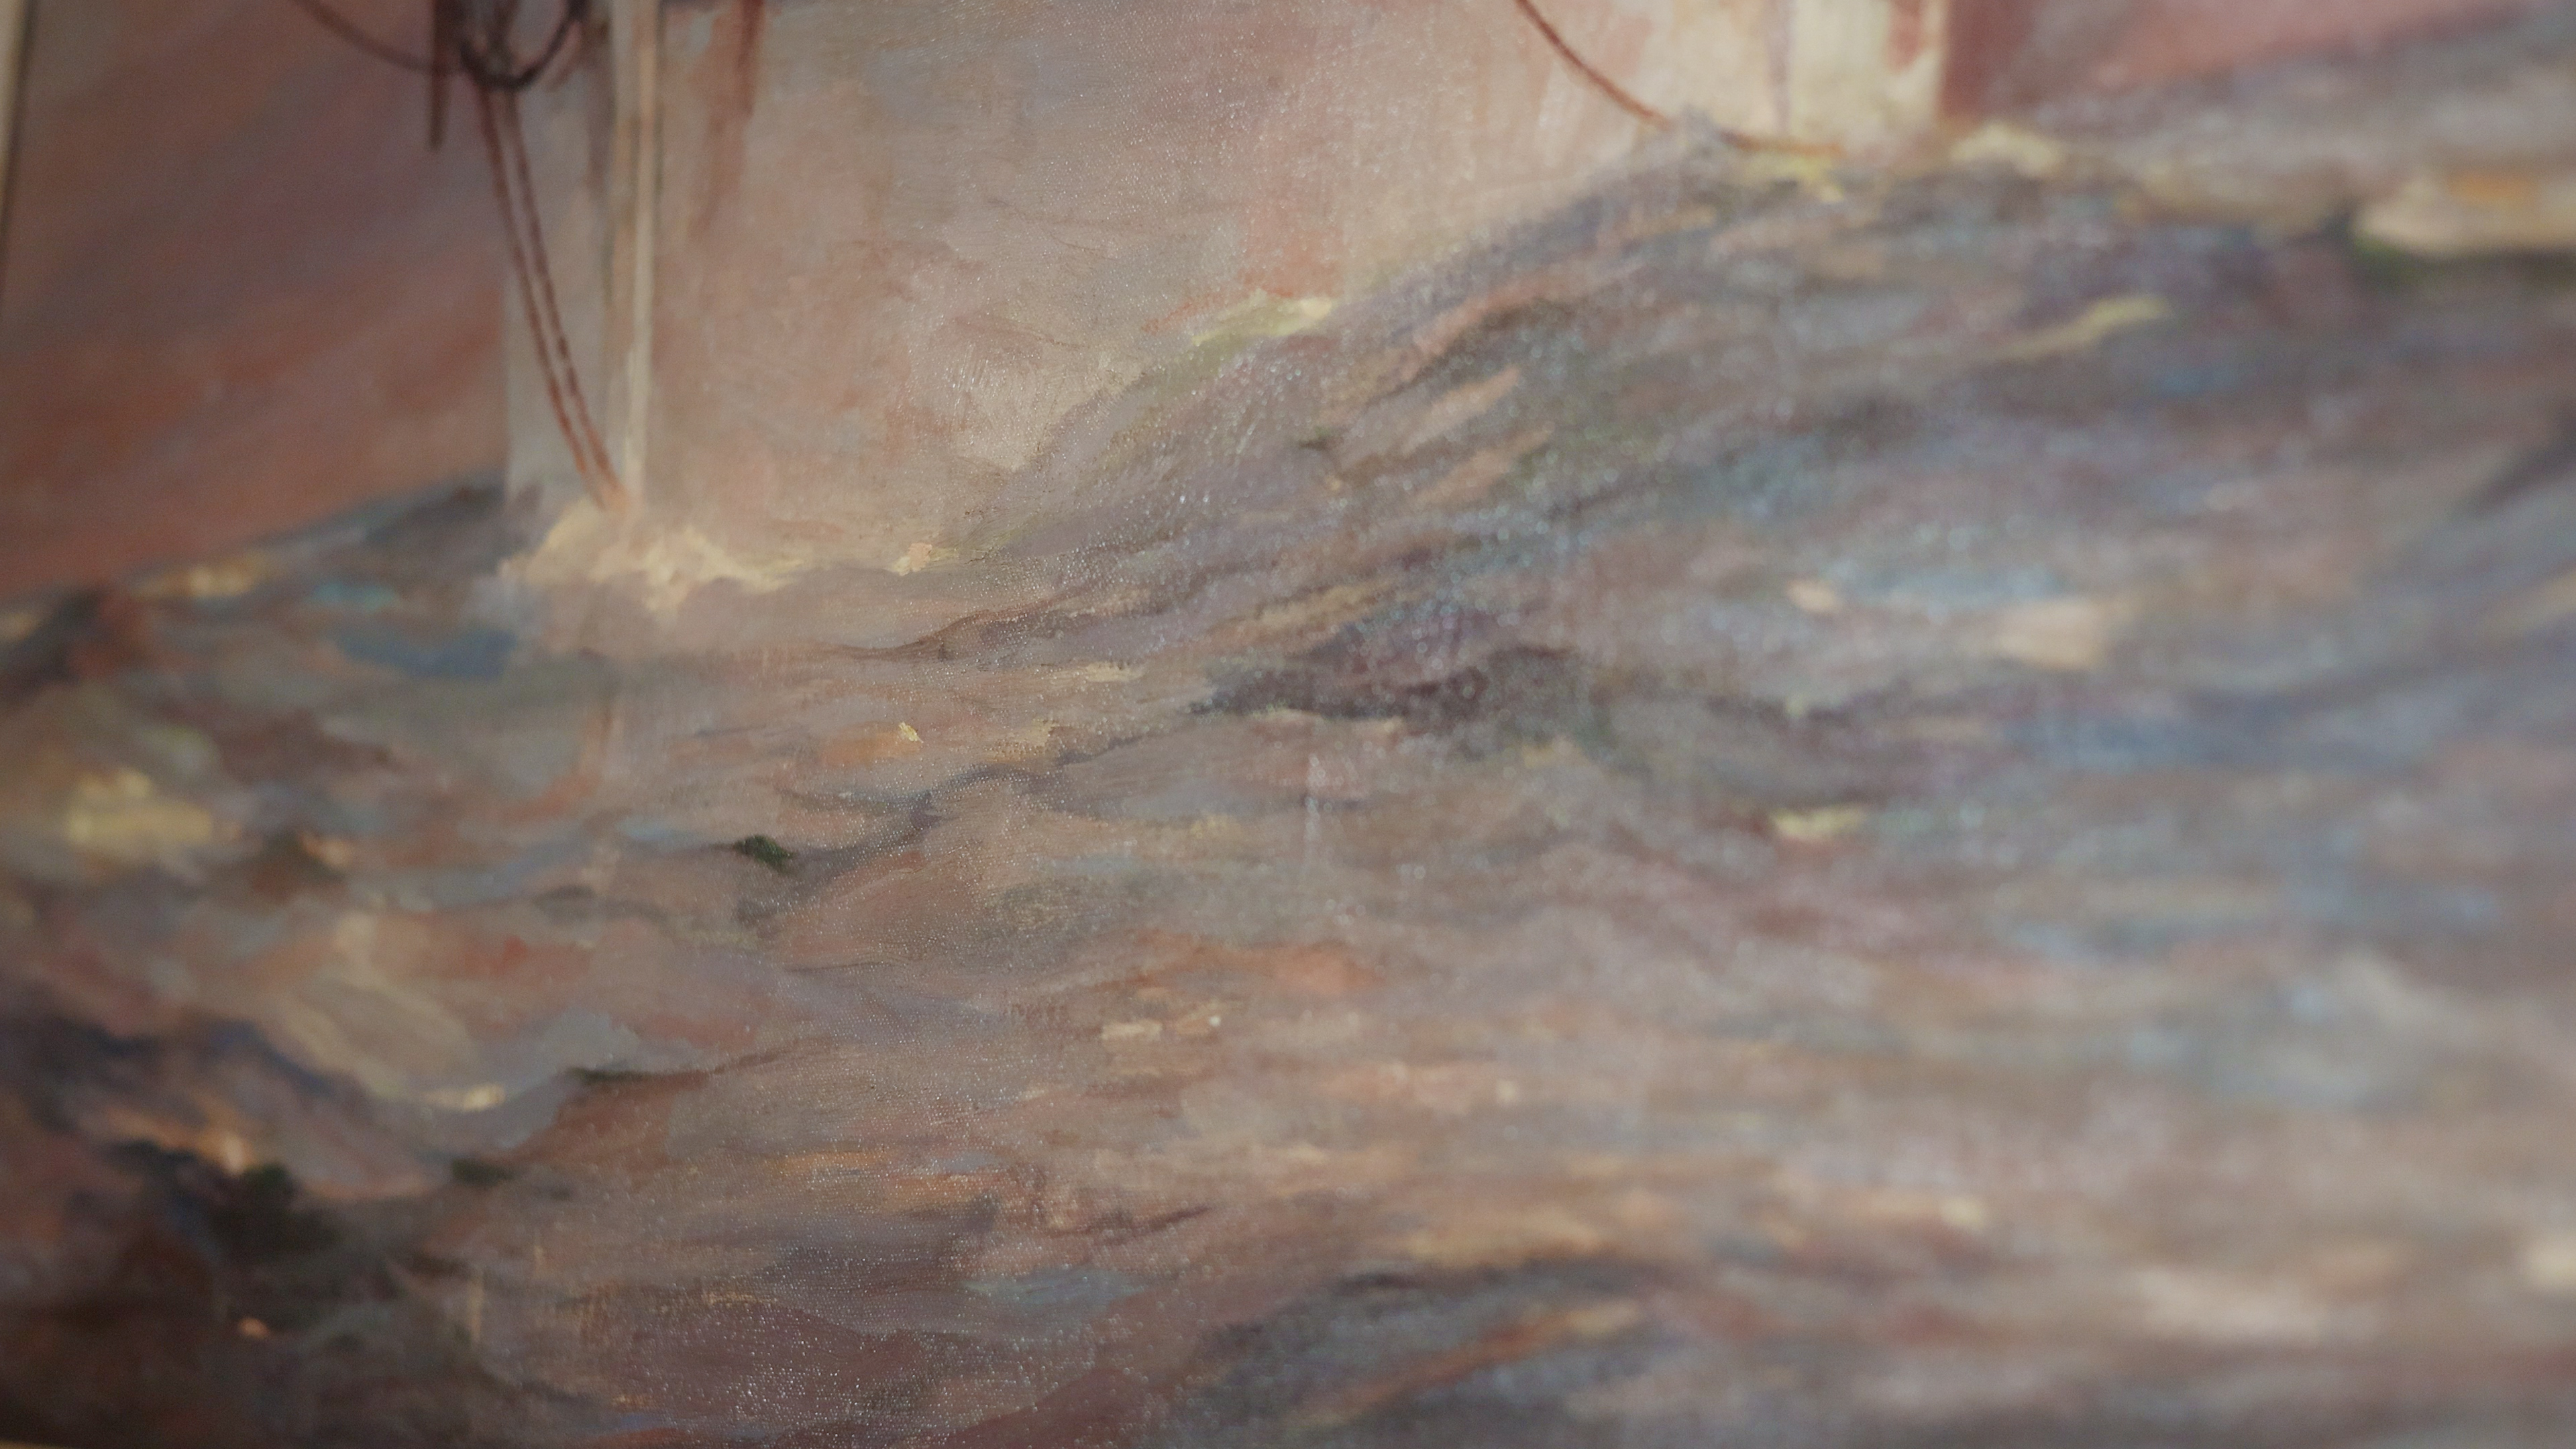 Detail of the water showing the dusty blues, pinks, and purples used in the artist’s palette.